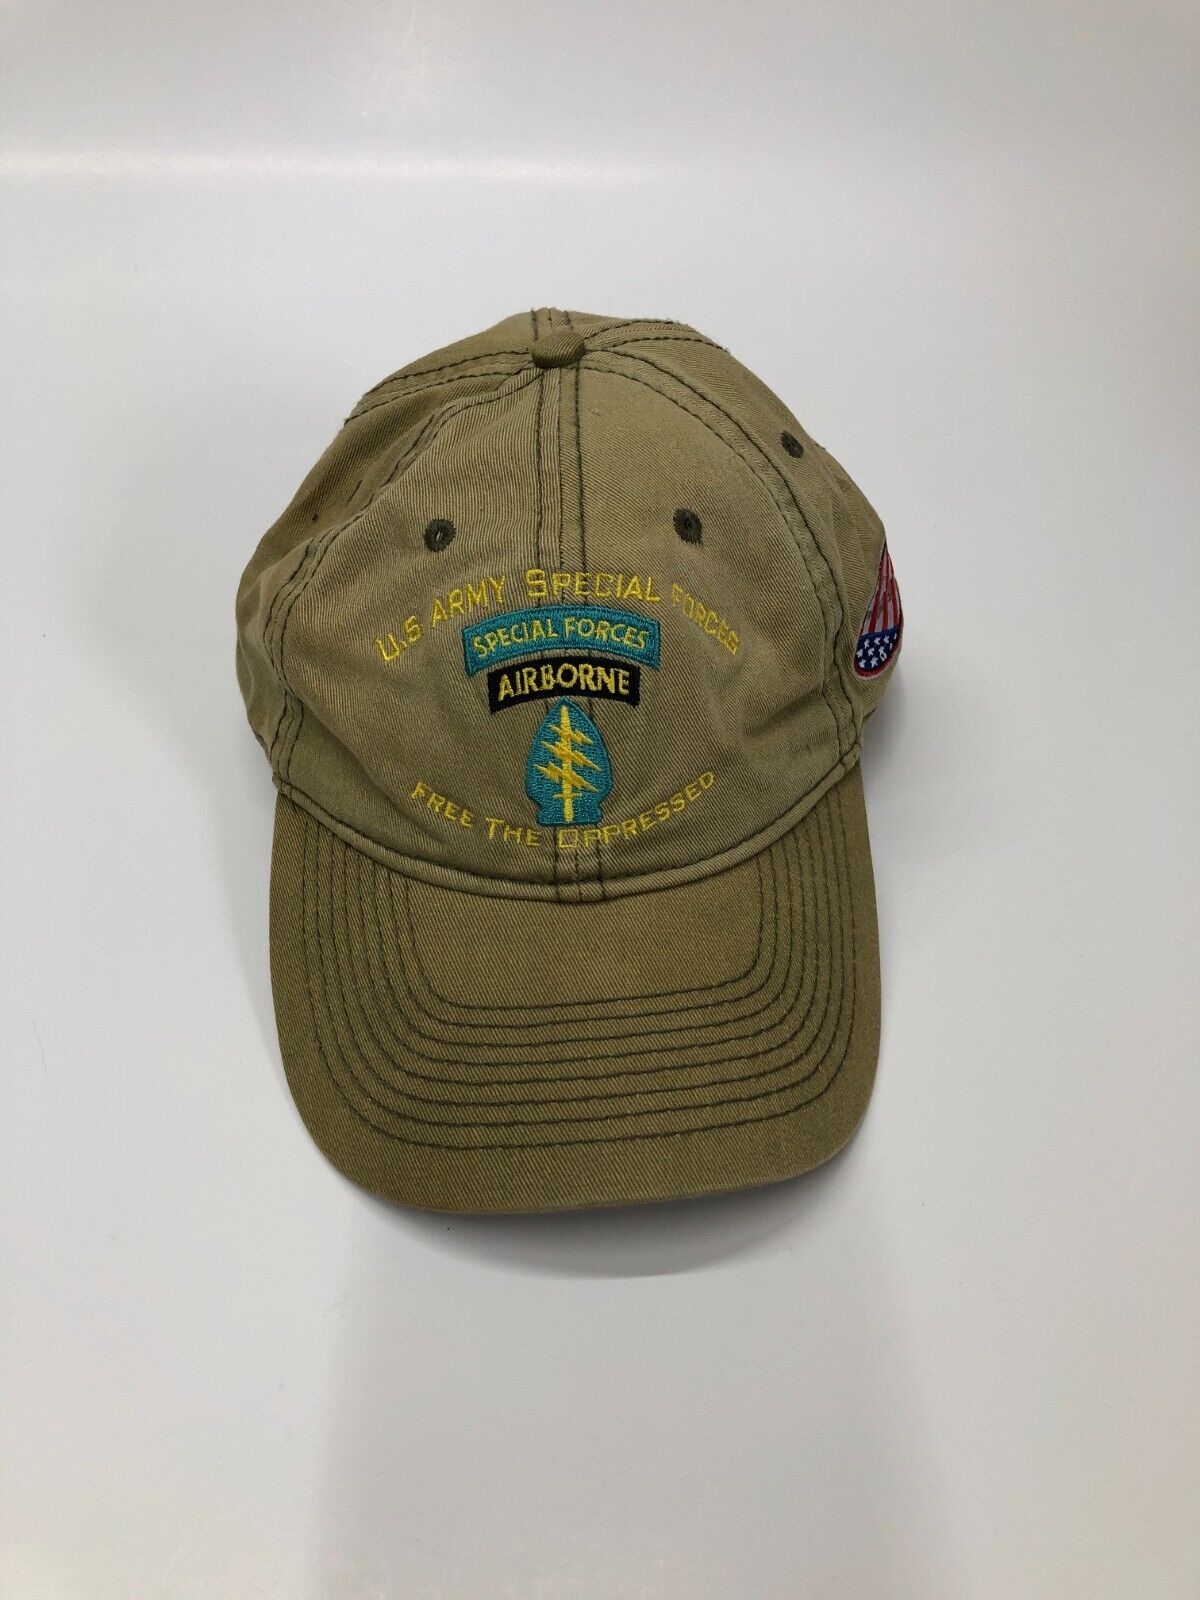 US Army Special Forces Airborne Cap  Ranger Joes